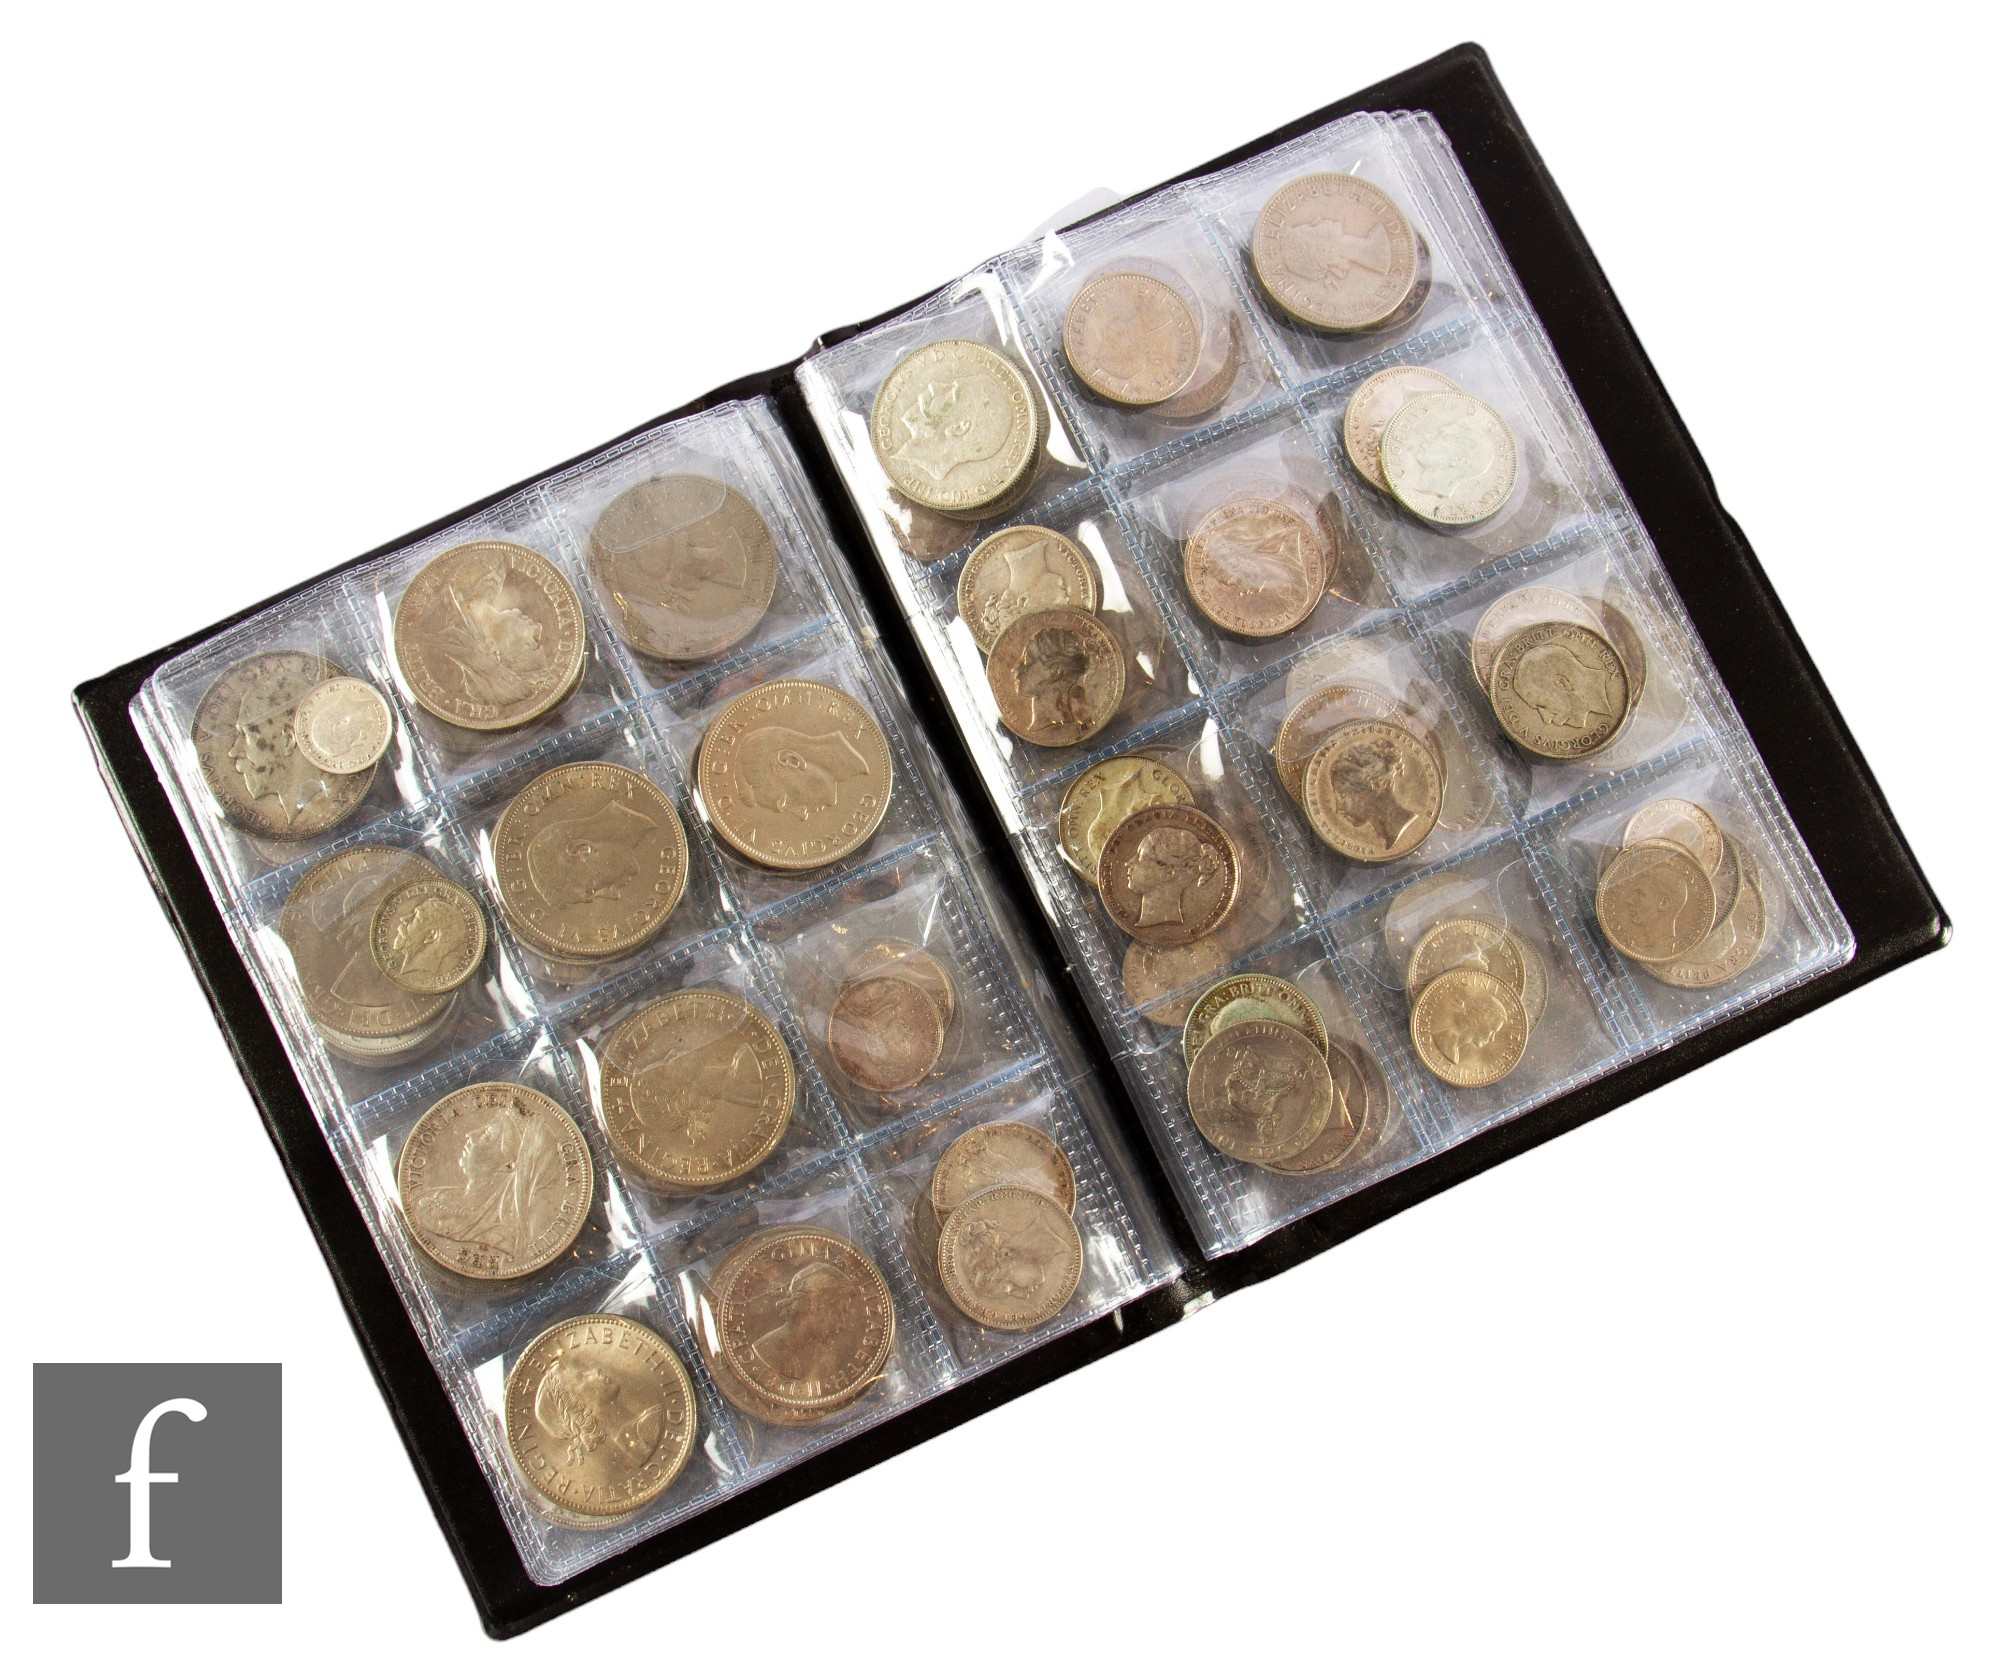 Victoria to Elizabeth II - Various half crowns, shillings and sixpences, some nickel and brass - Image 2 of 8